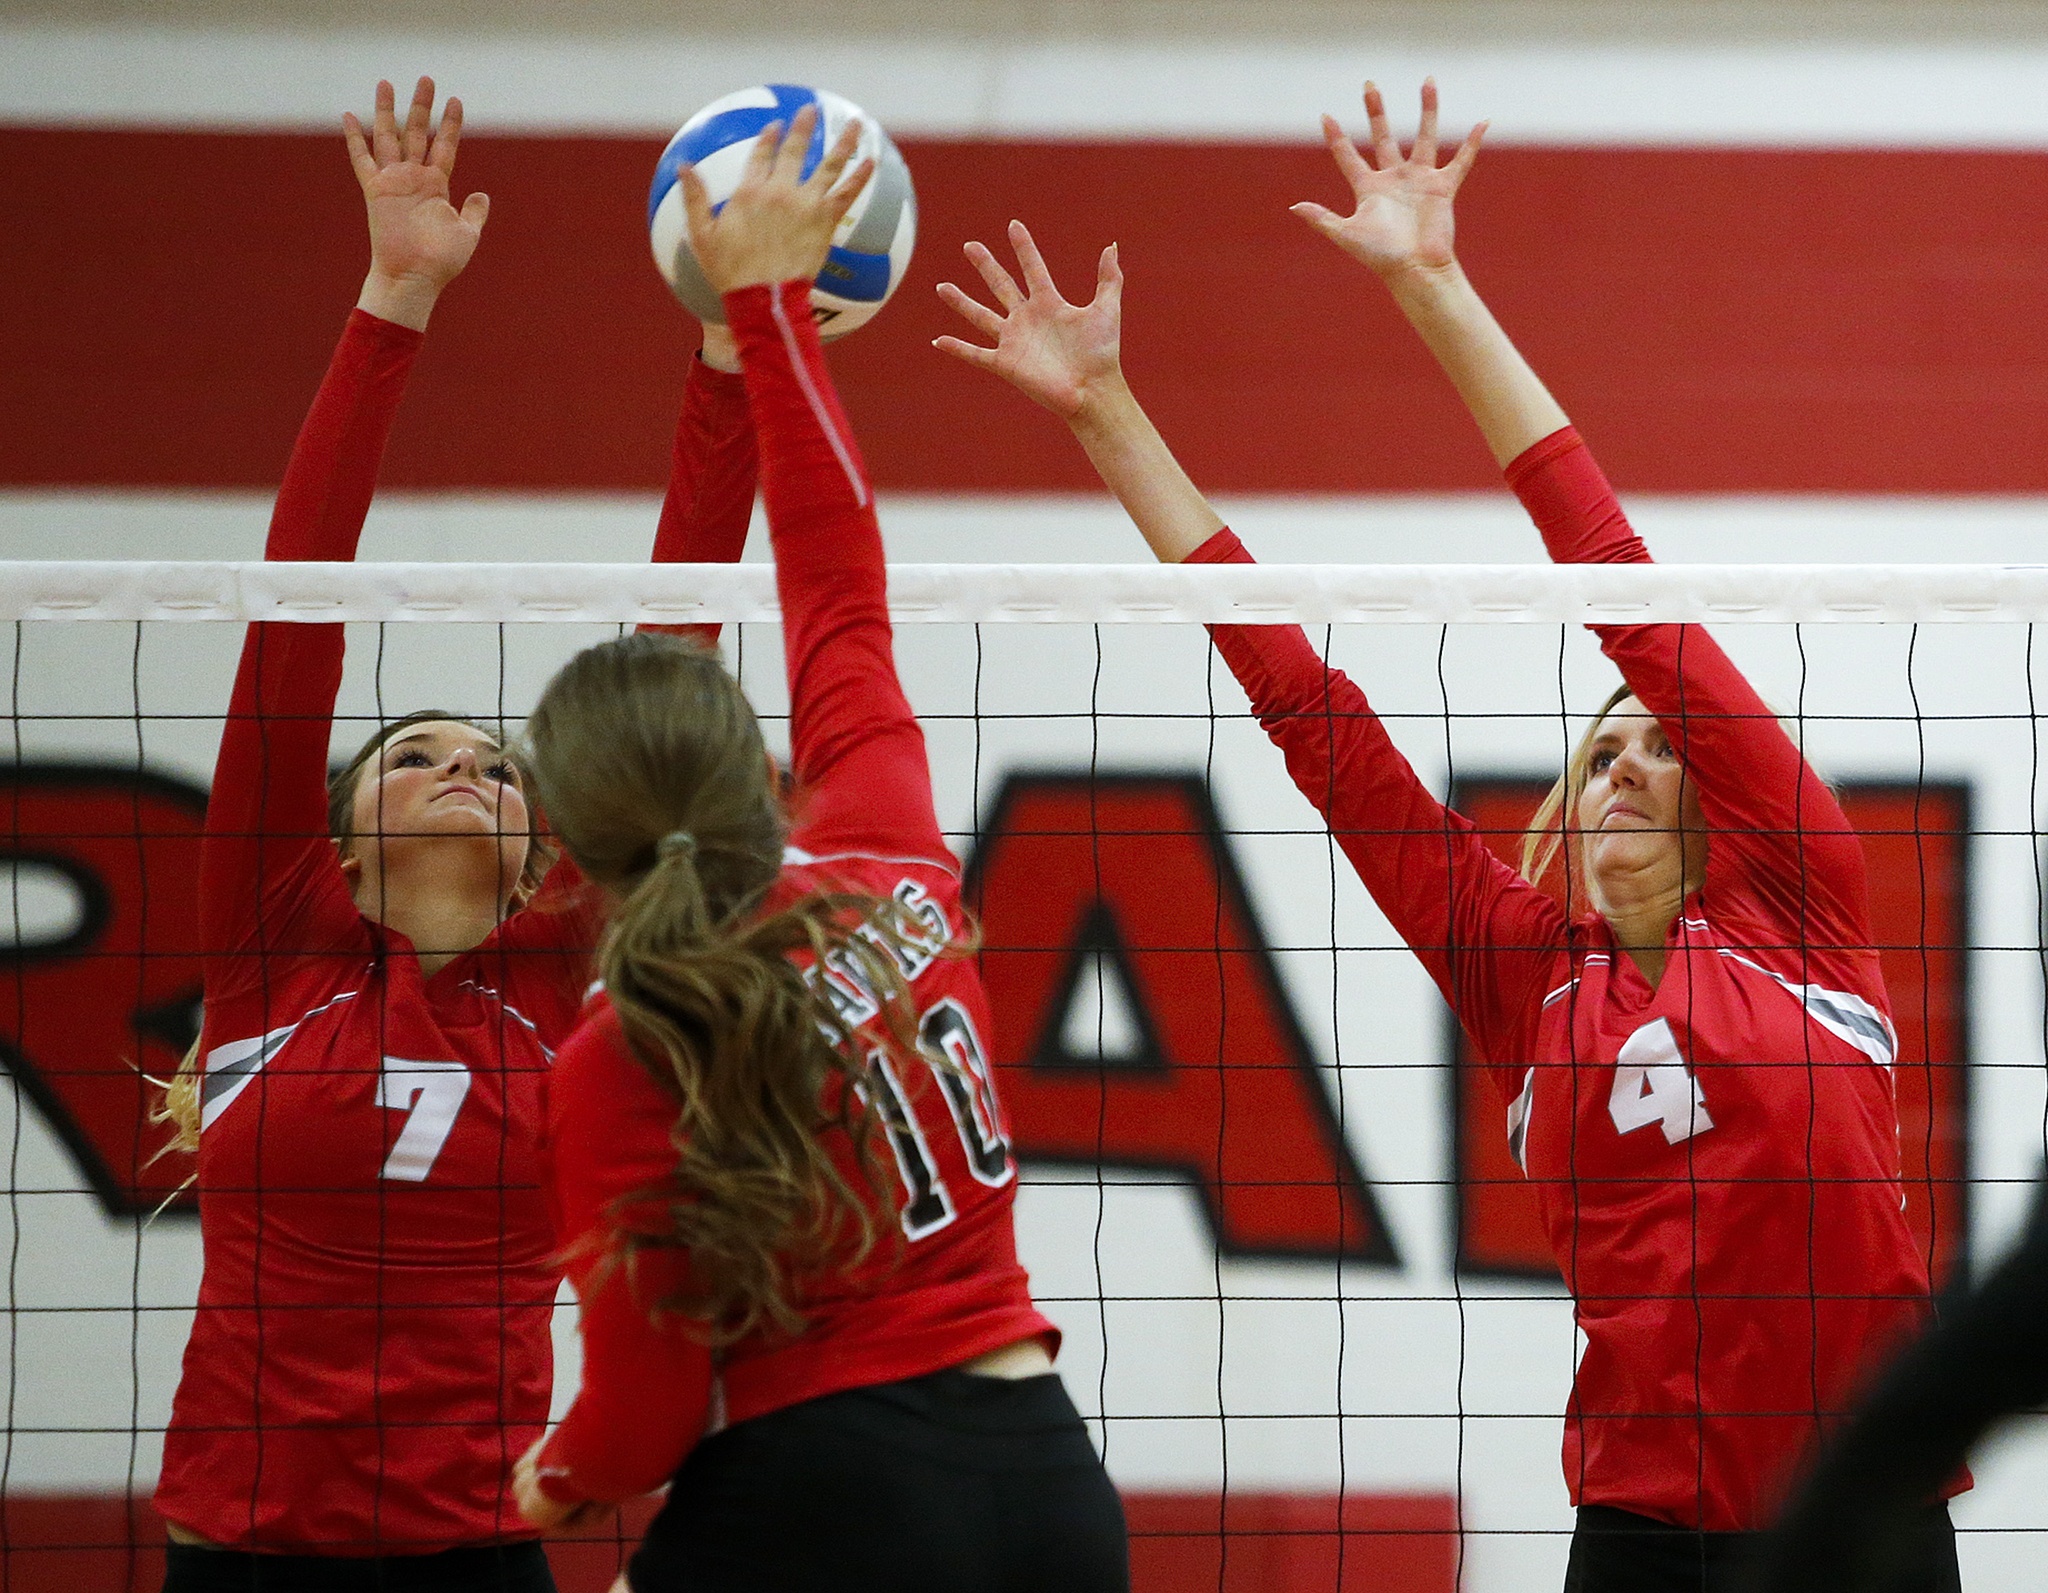 Stanwood’s Taya Shoemaker (7) and Devon Martinka (4) jump up to block a spike from Mountlake Terrace’s Leeann Weatherby (10) during a game at Stanwood High School on Tuesday, Oct. 11. (Ian Terry / The Herald)